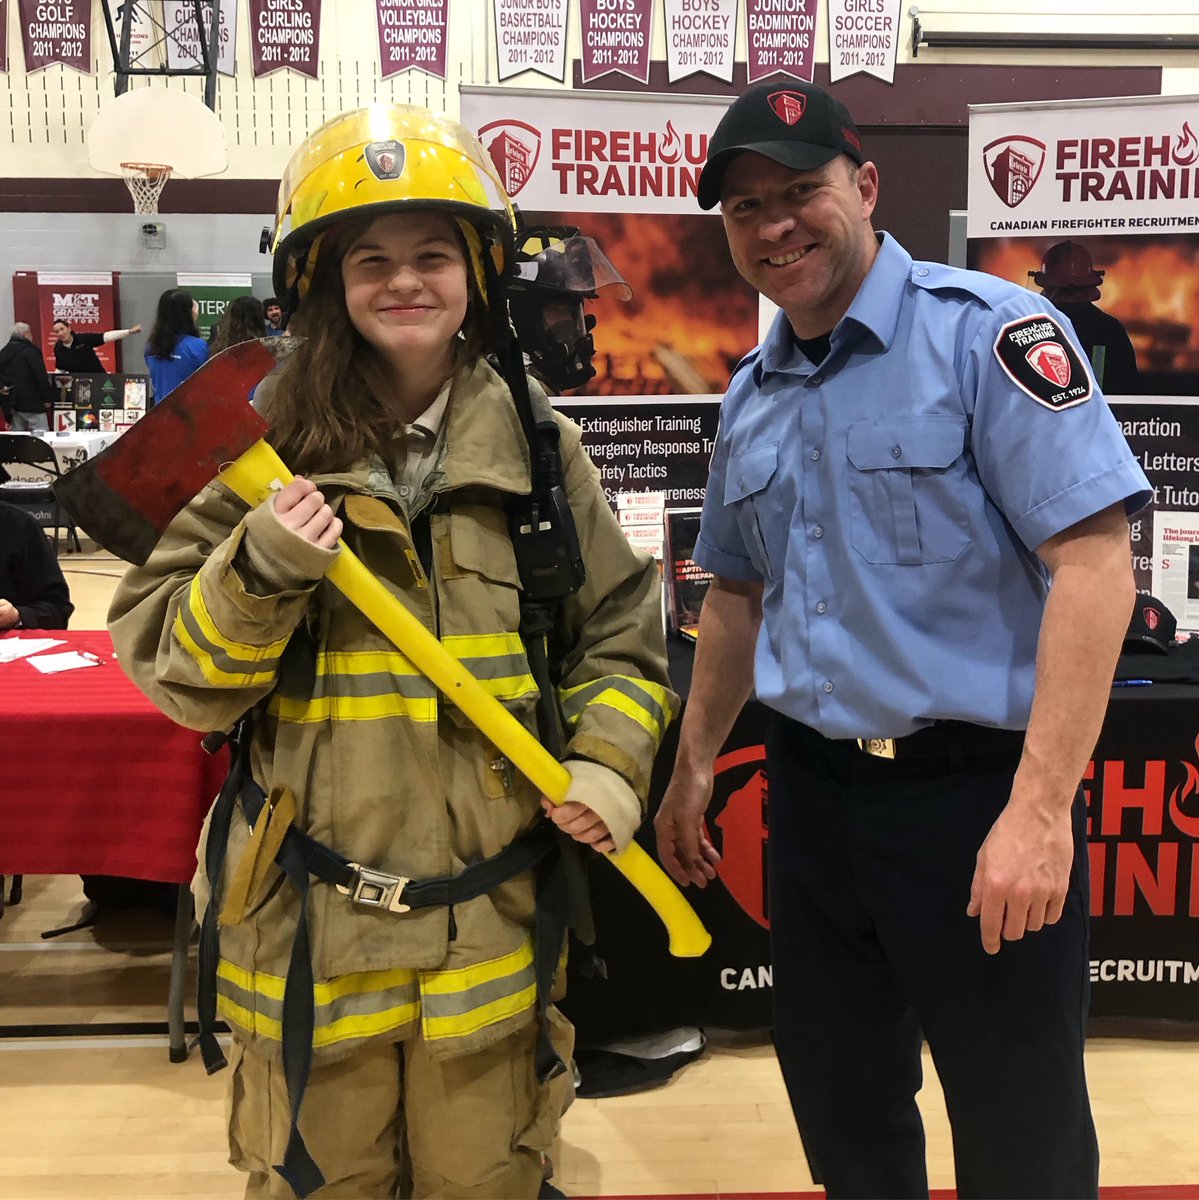 A late night event in Guelph, with an early morning ahead in Eastern Ontario!🧯#careerfair  #lovewhatwedo #firetraining
...
…
#careerday #firecareers #firefighter #dispatcher #fireinspector #firechief